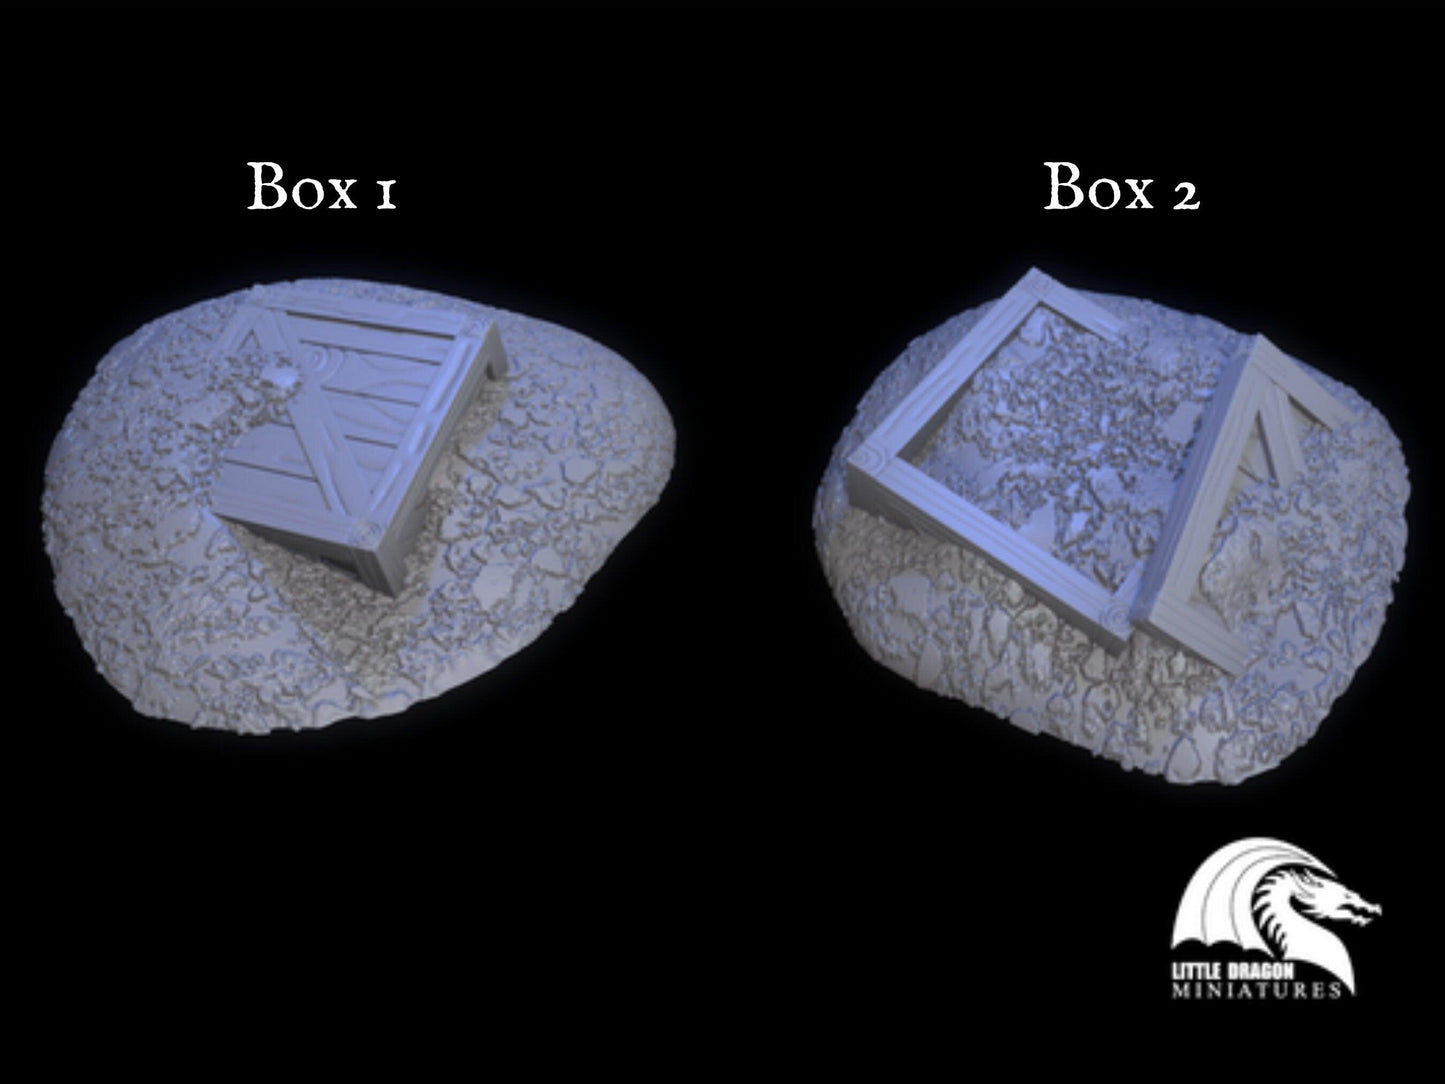 Box miniatures wargaming terrain Tabletop Gaming | DnD terrain | Dungeons and Dragons, DnD scenery - Plague Miniatures shop for DnD Miniatures